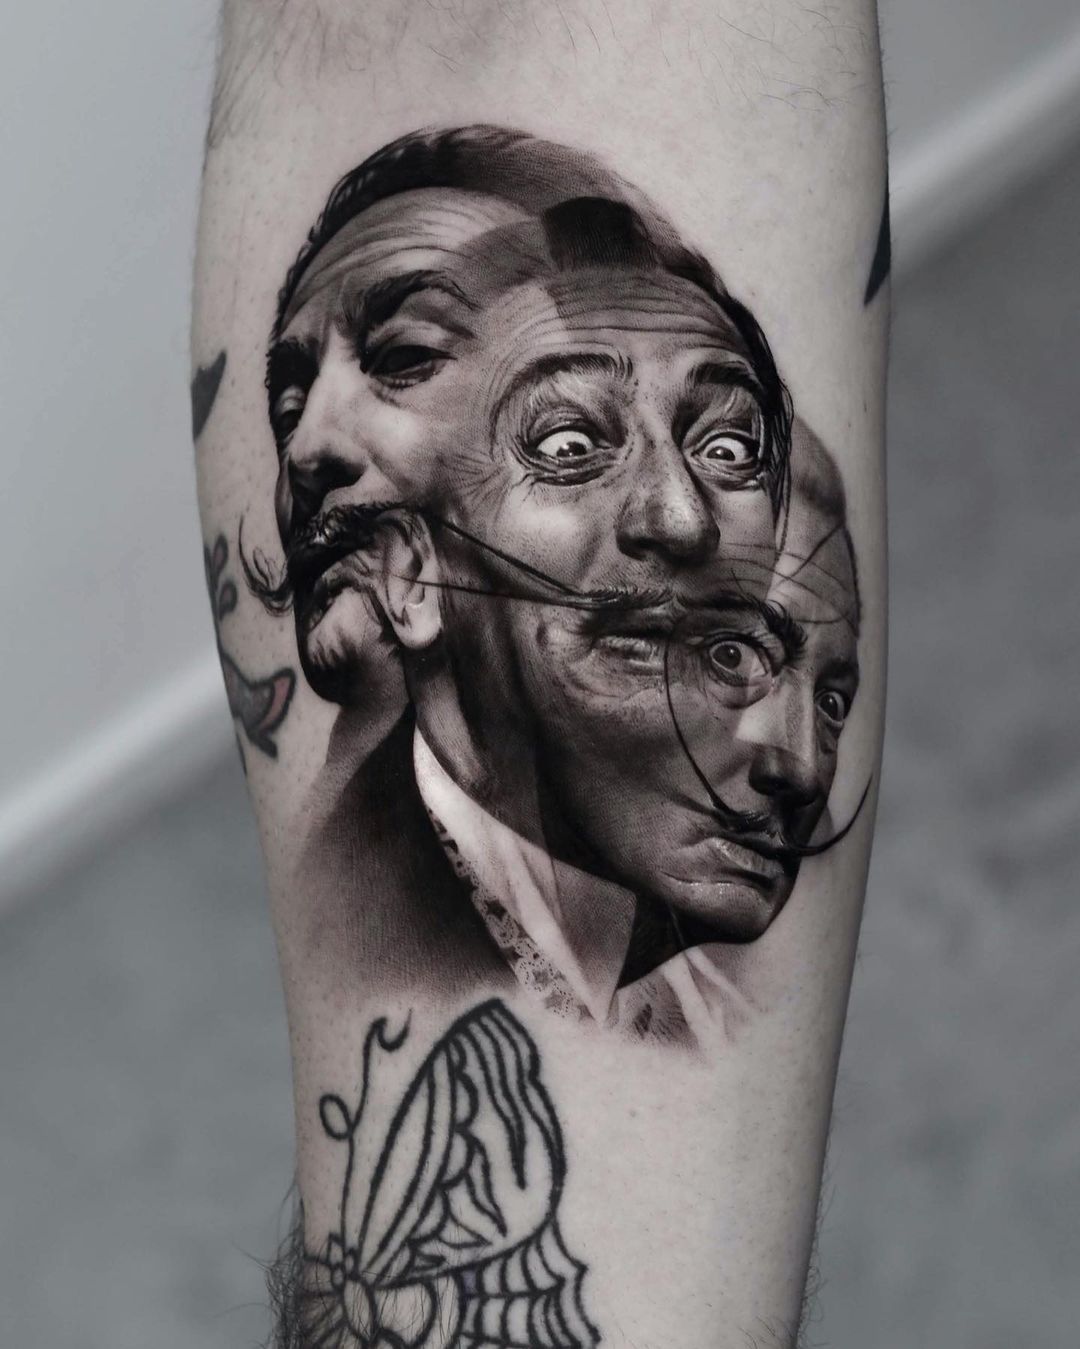 surrealist tattoos | Oddity Central - Collecting Oddities